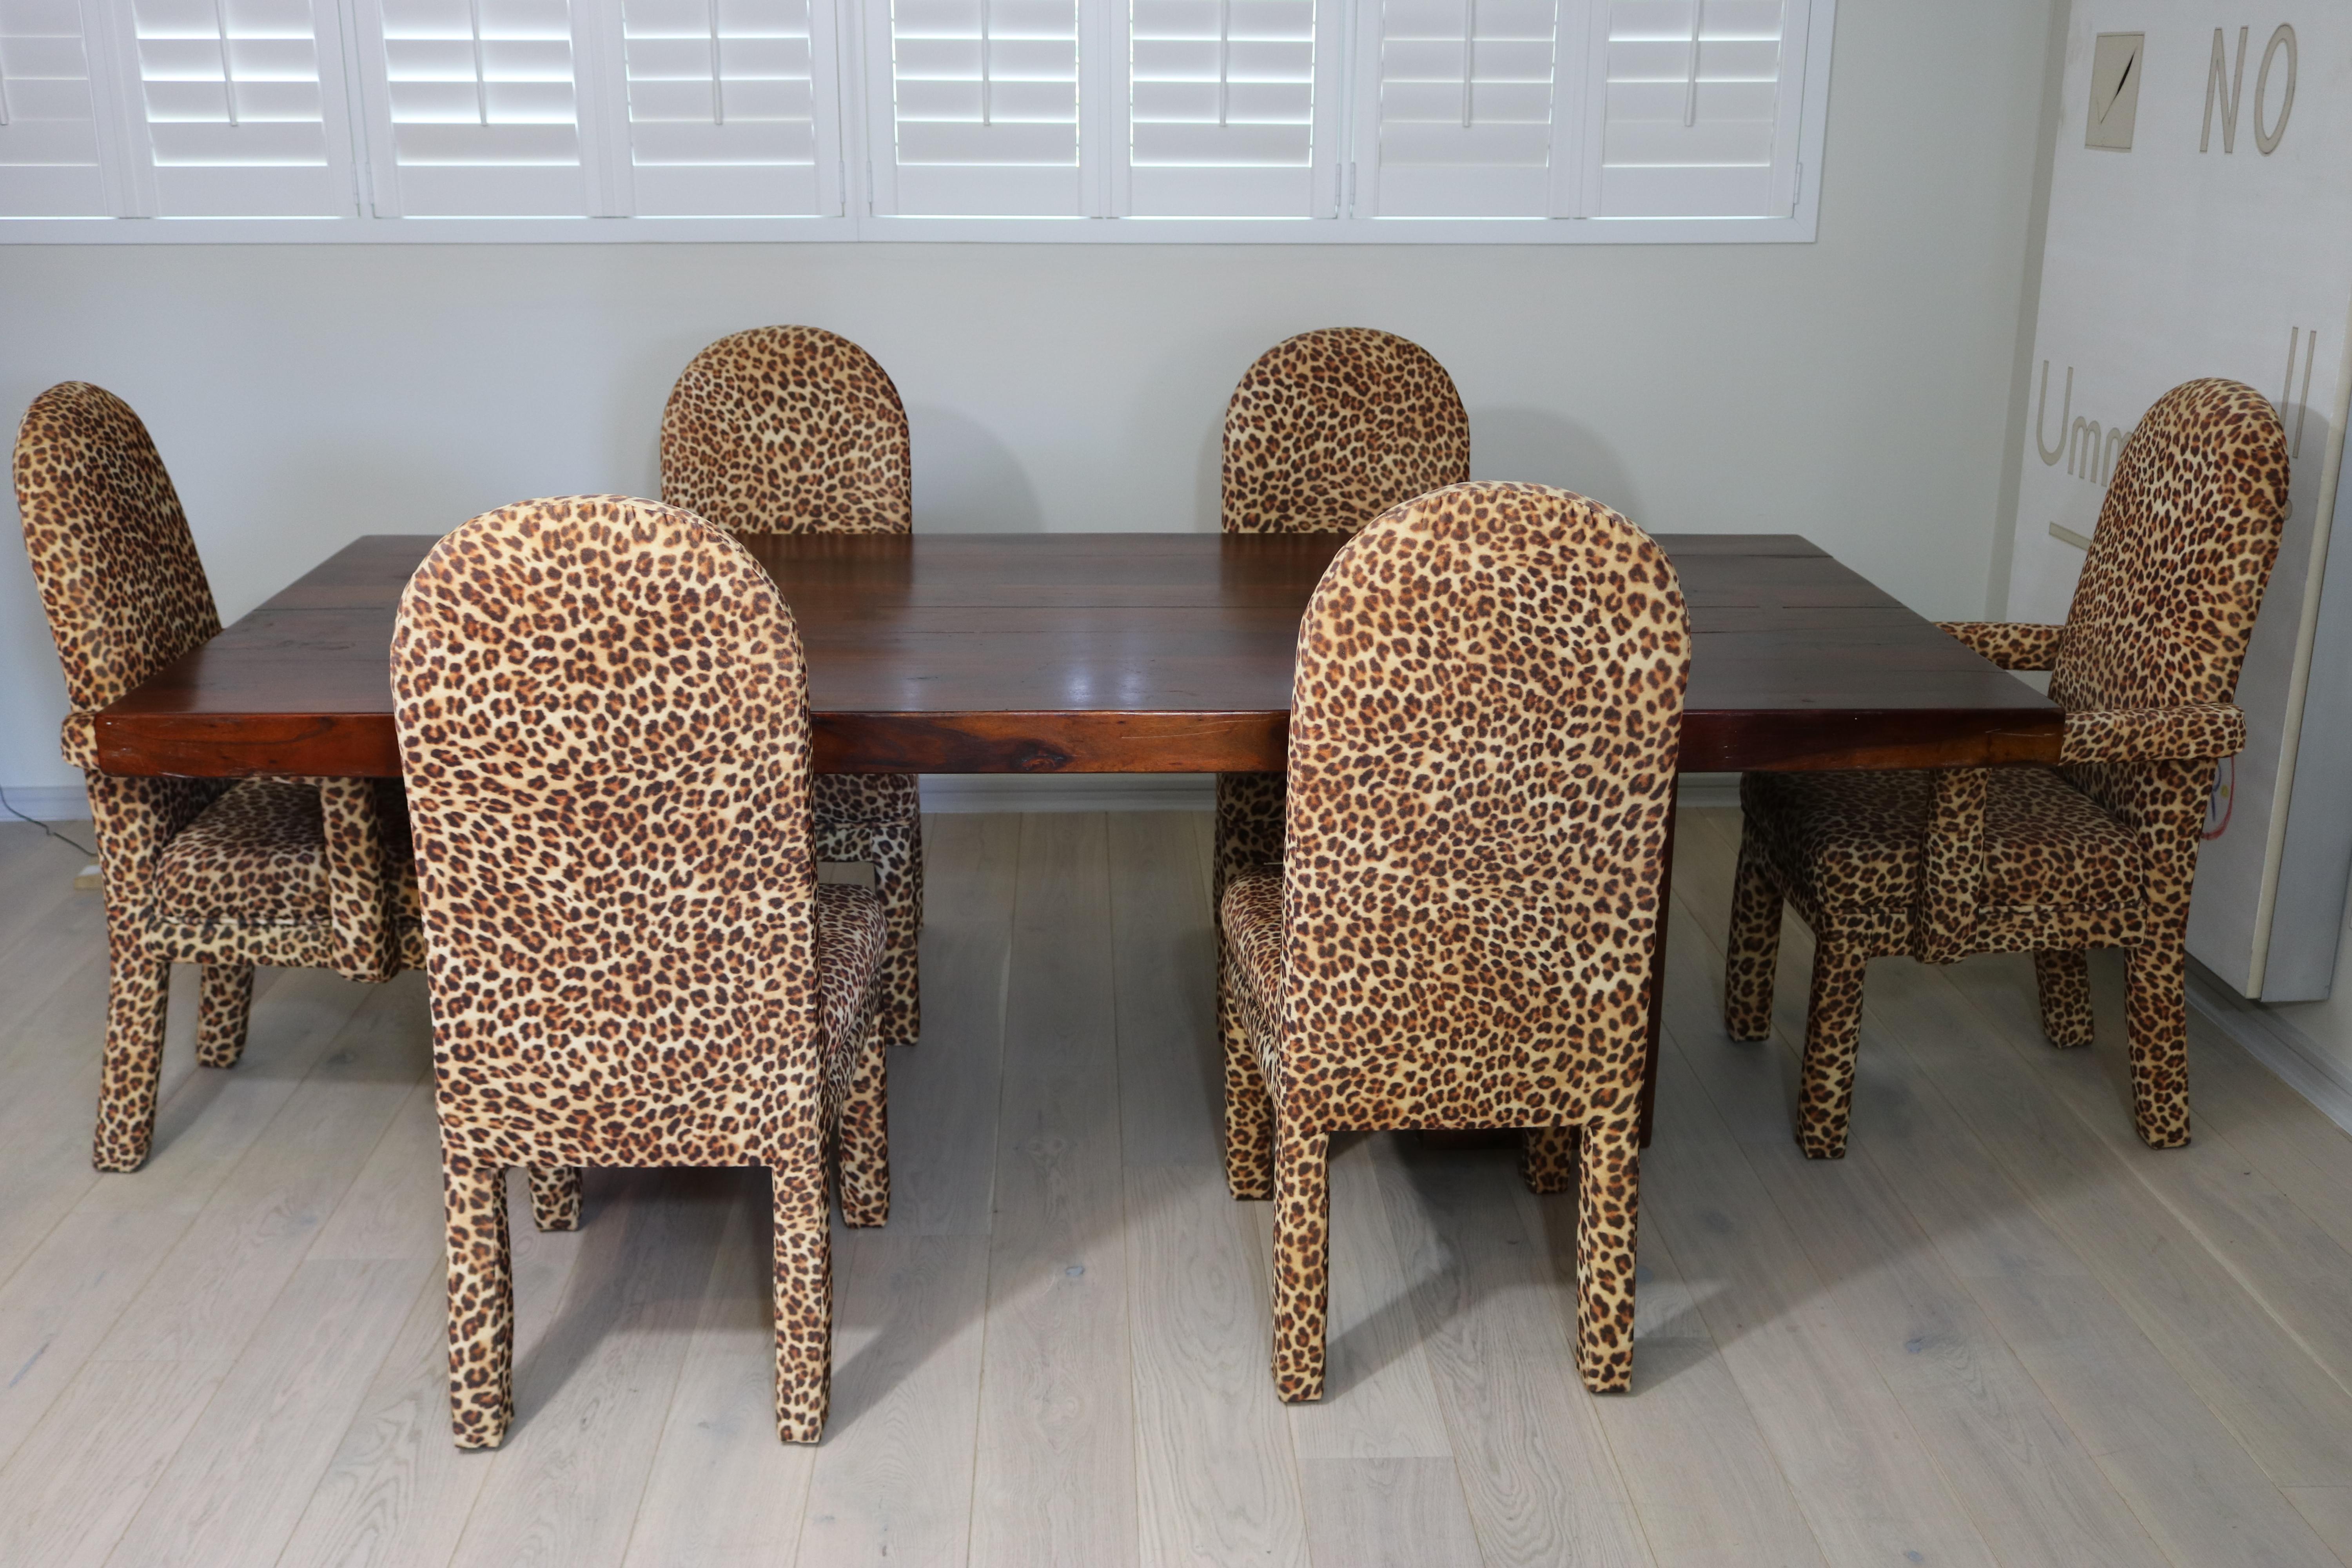 20th Century Mid-Century Modern Set of 6 Faux Leopard Dining Chairs 4 Armless / 2-Arm For Sale